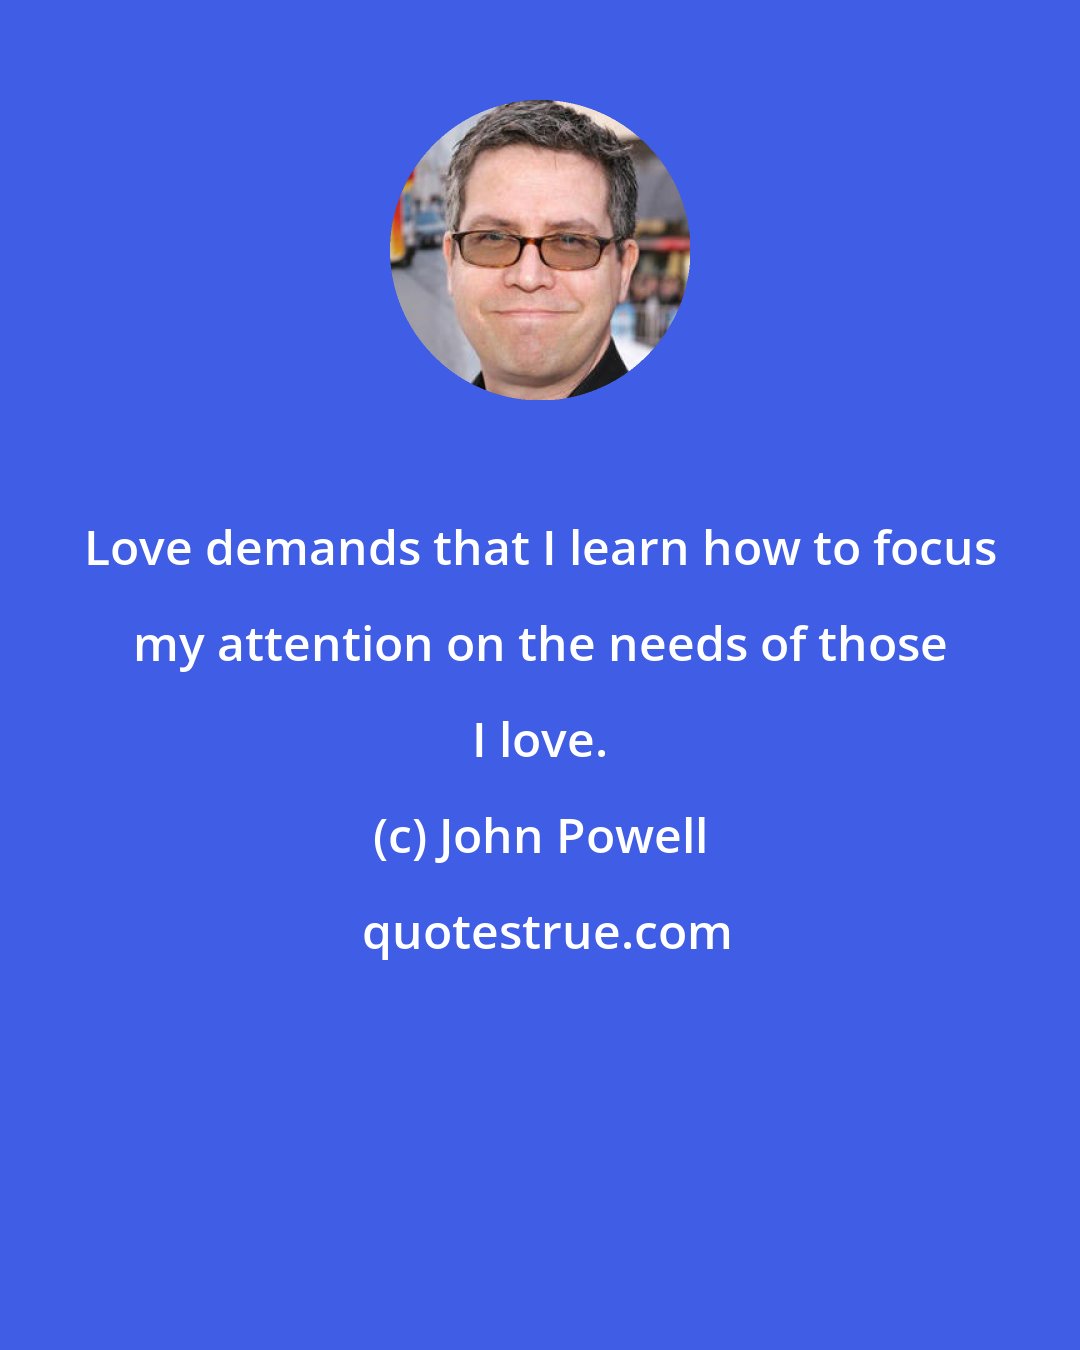 John Powell: Love demands that I learn how to focus my attention on the needs of those I love.